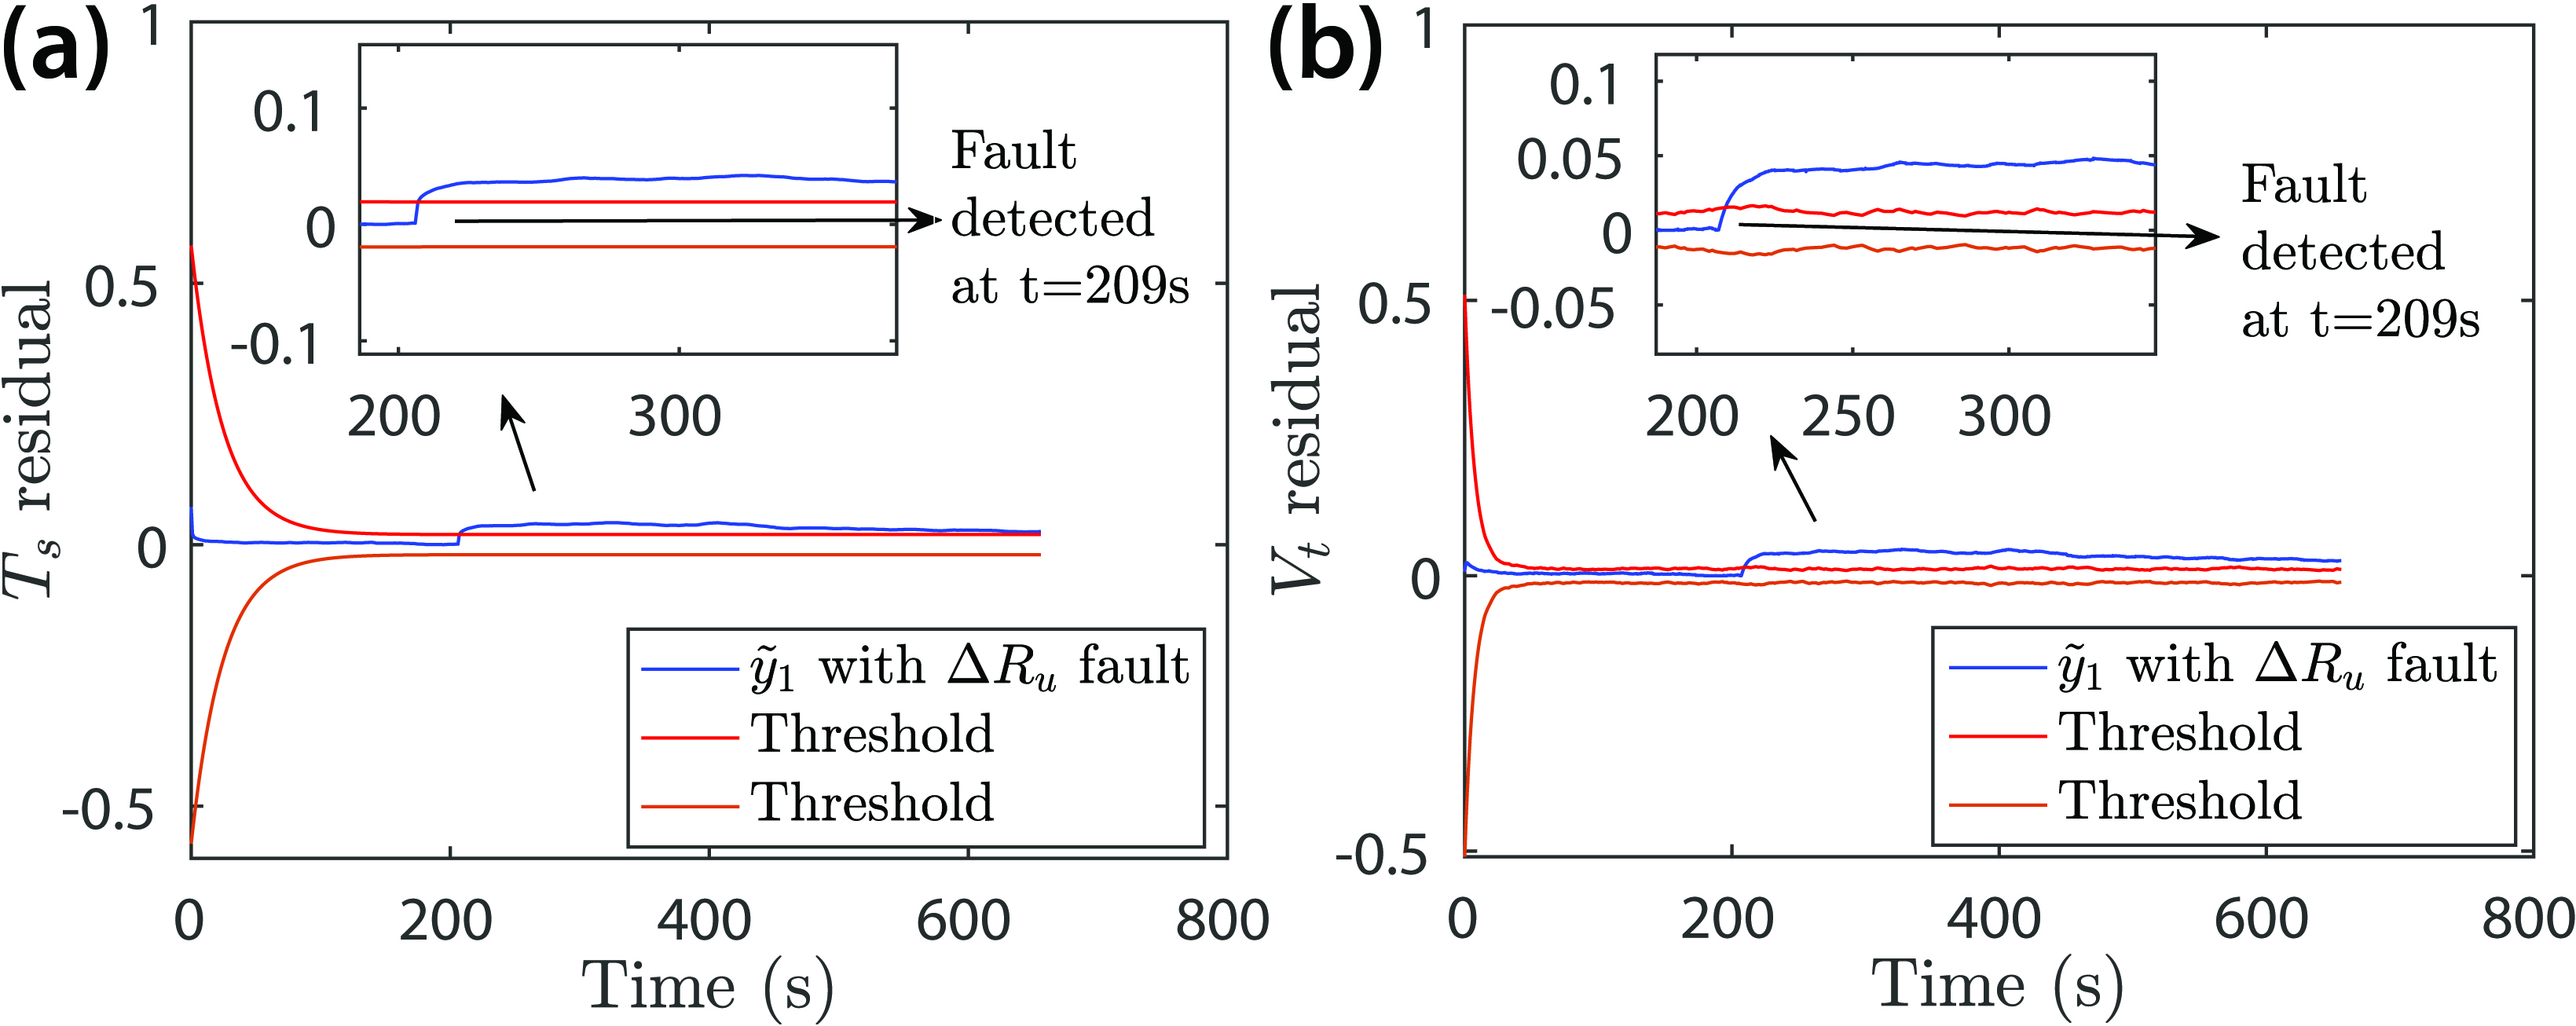 &lt;strong&gt;Figure 5.&lt;/strong&gt; Residual responses under a convective cooling resistance fault that is injected at 206 seconds. &lt;strong&gt;5a.&lt;/strong&gt; Surface temperature error. &lt;strong&gt;5b.&lt;/strong&gt; Output voltage error. Figure courtesy of Geetika Vennam.